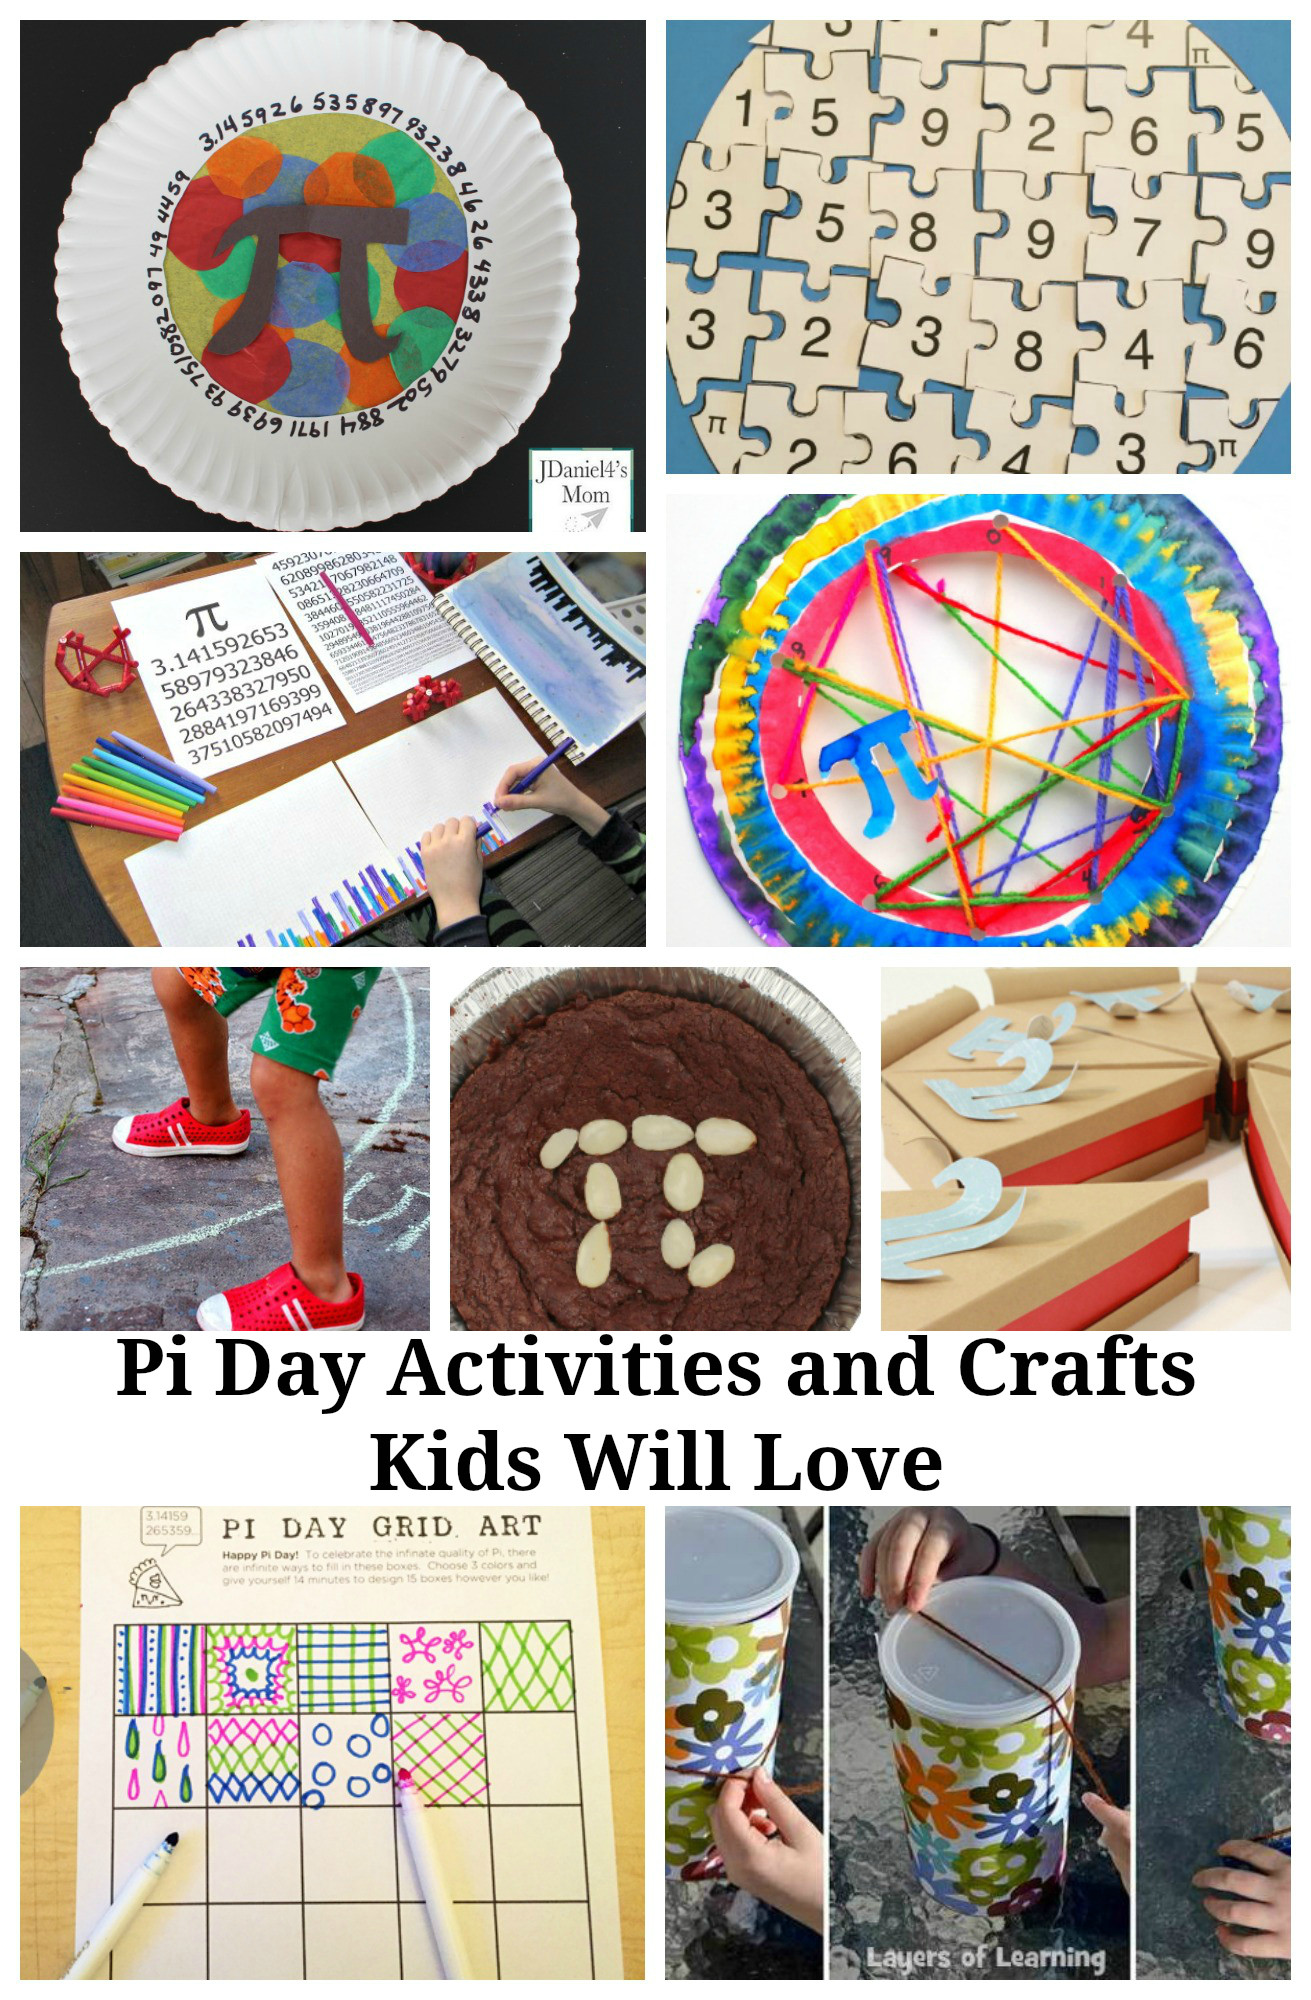 Pi Day Activities For Kids
 Pi Day Activities and Crafts Kids Will Love JDaniel4s Mom